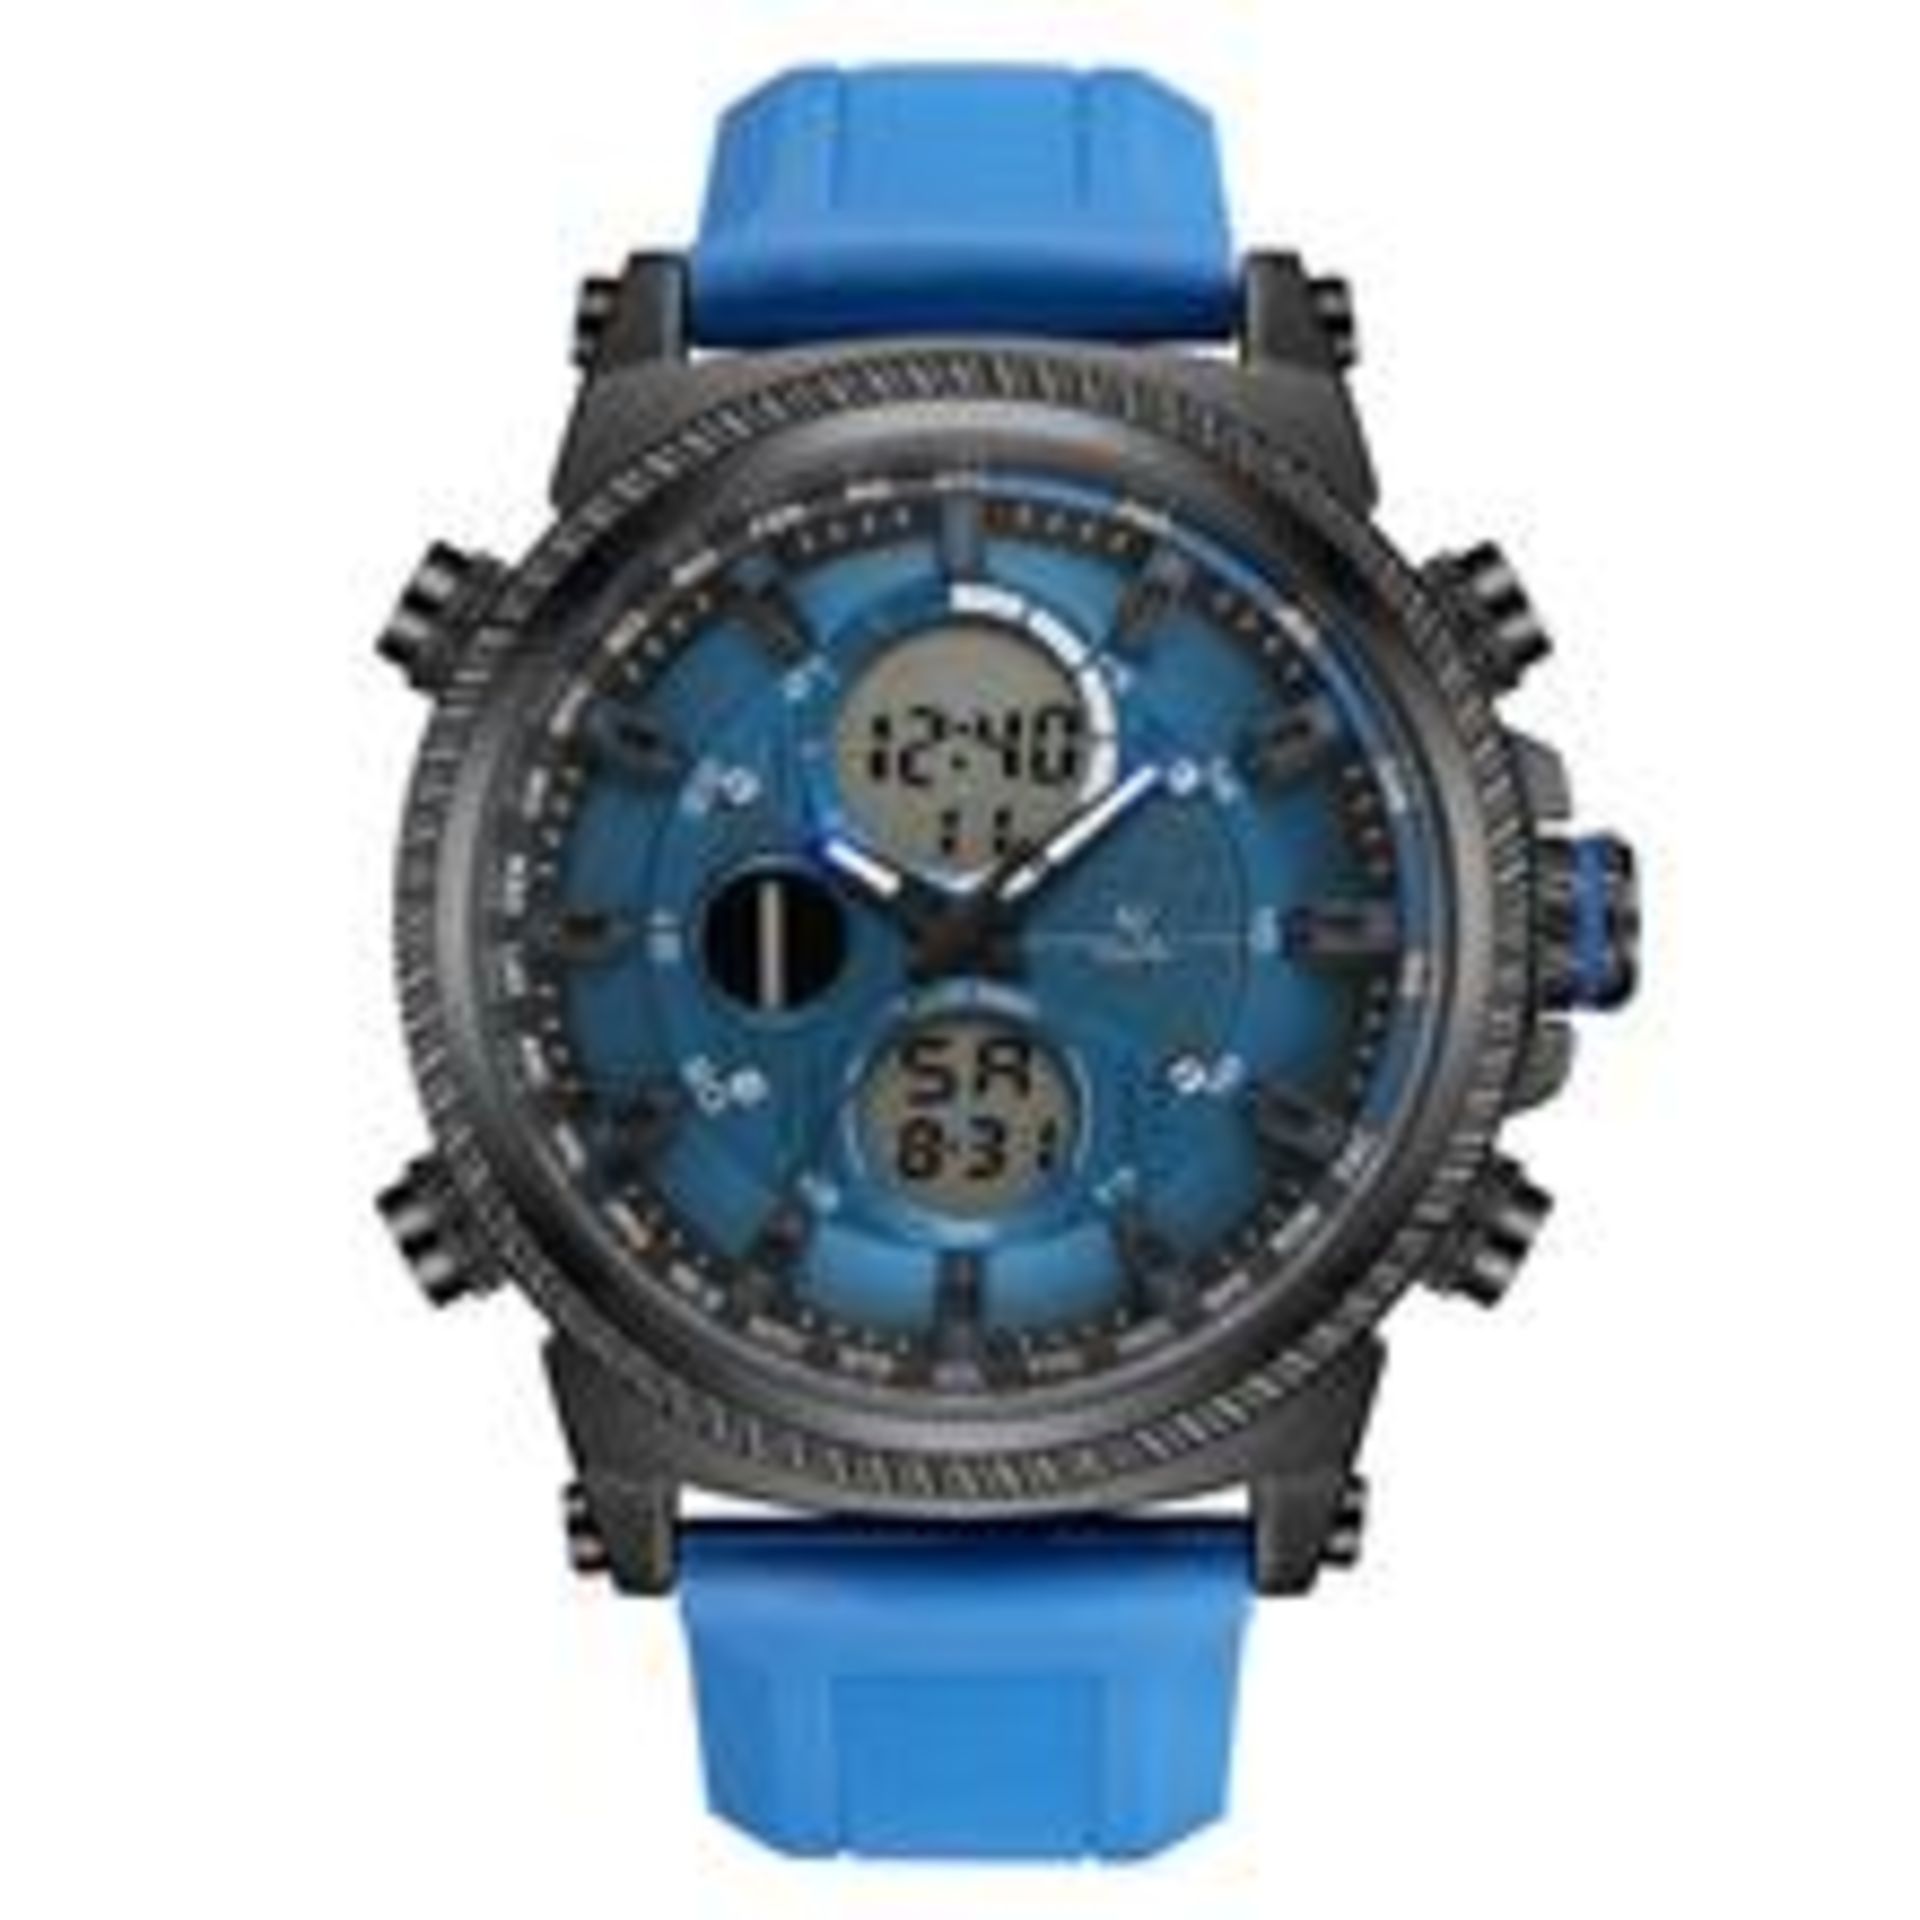 V Brand New Michael Philippe Gents Adventurer Watch - ISP £119.99 (Michael Philippe) - Image 2 of 2